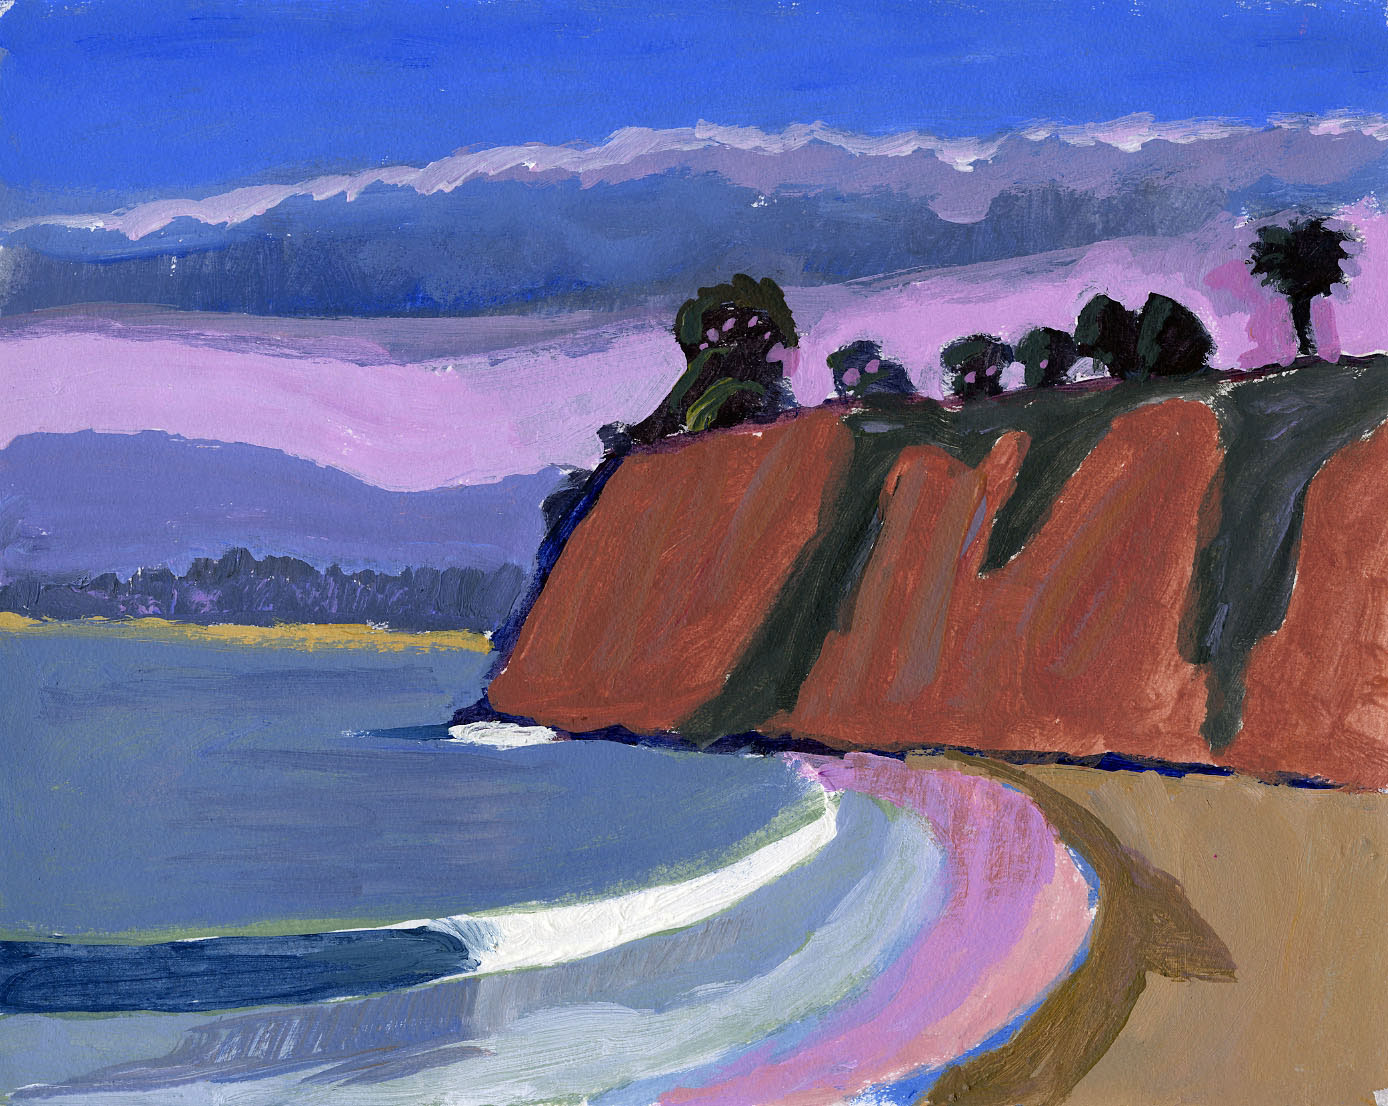 Painting of a beach, waves, and bluffs